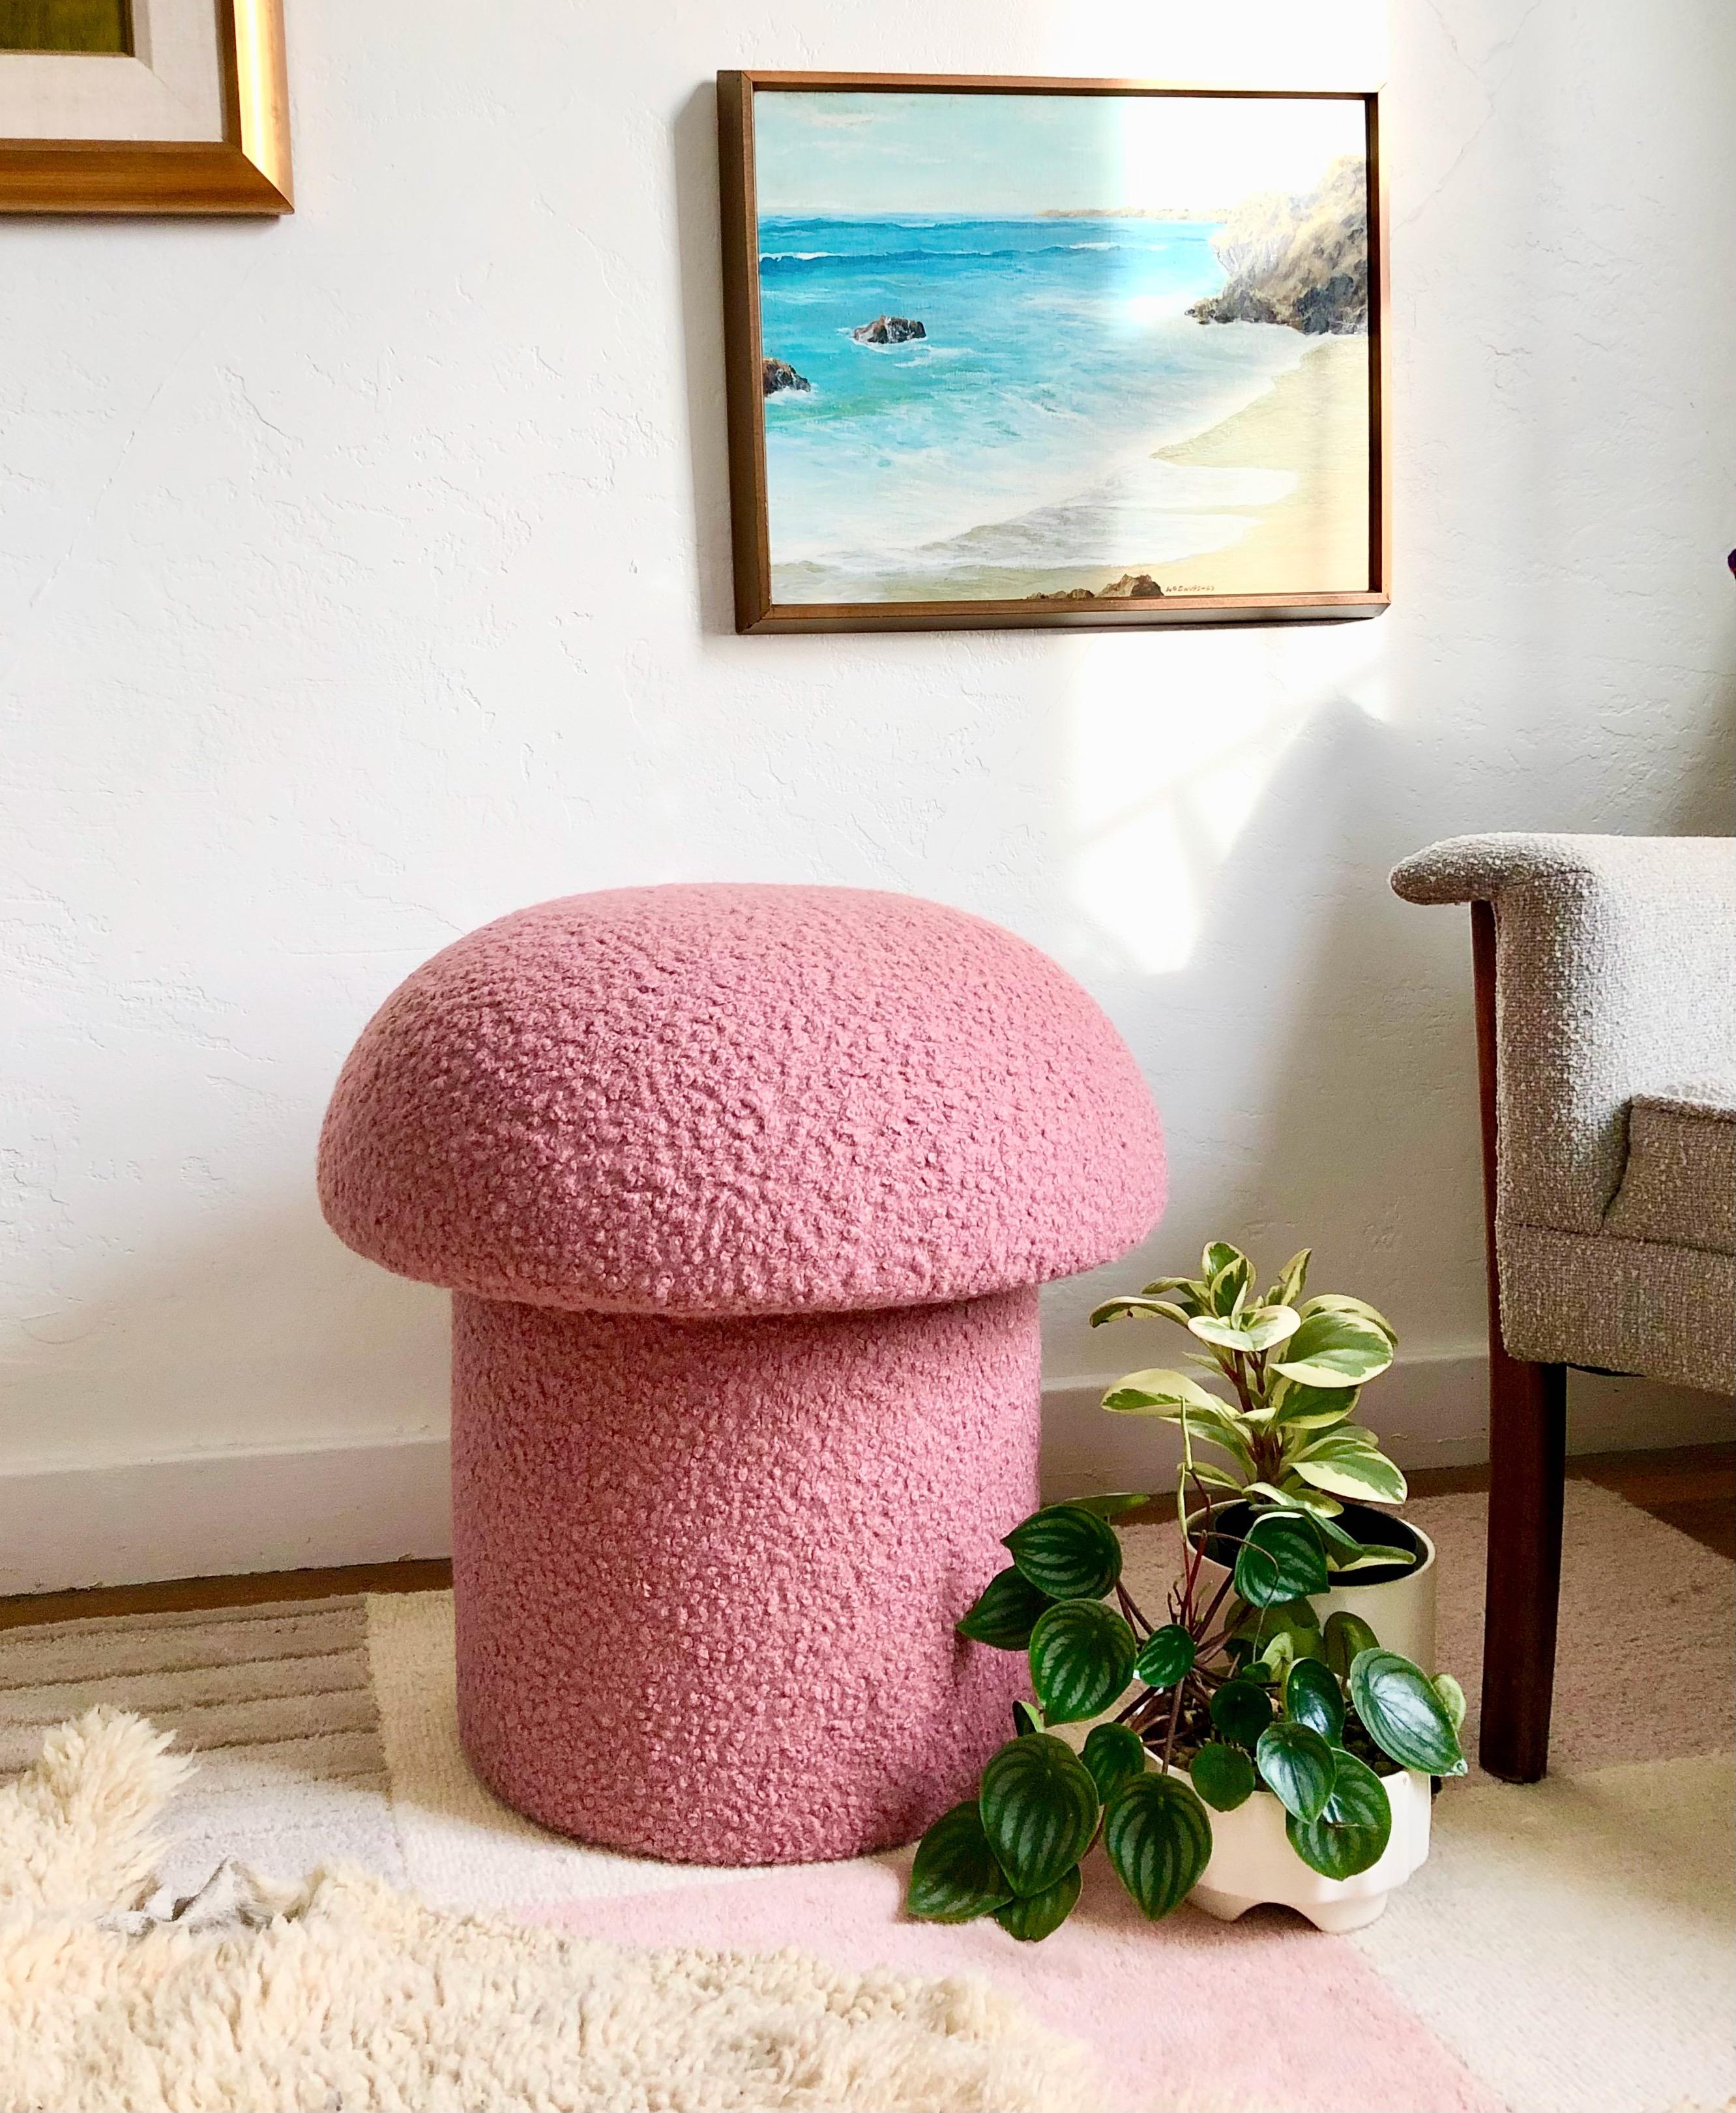 A handmade mushroom shaped stool, upholstered in a pink colored curly boucle fabric. Perfect for using as a footstool or extra occasional seating. A comfortable cushioned seat and sculptural accent piece.
Mushroom ottomans are made to order,